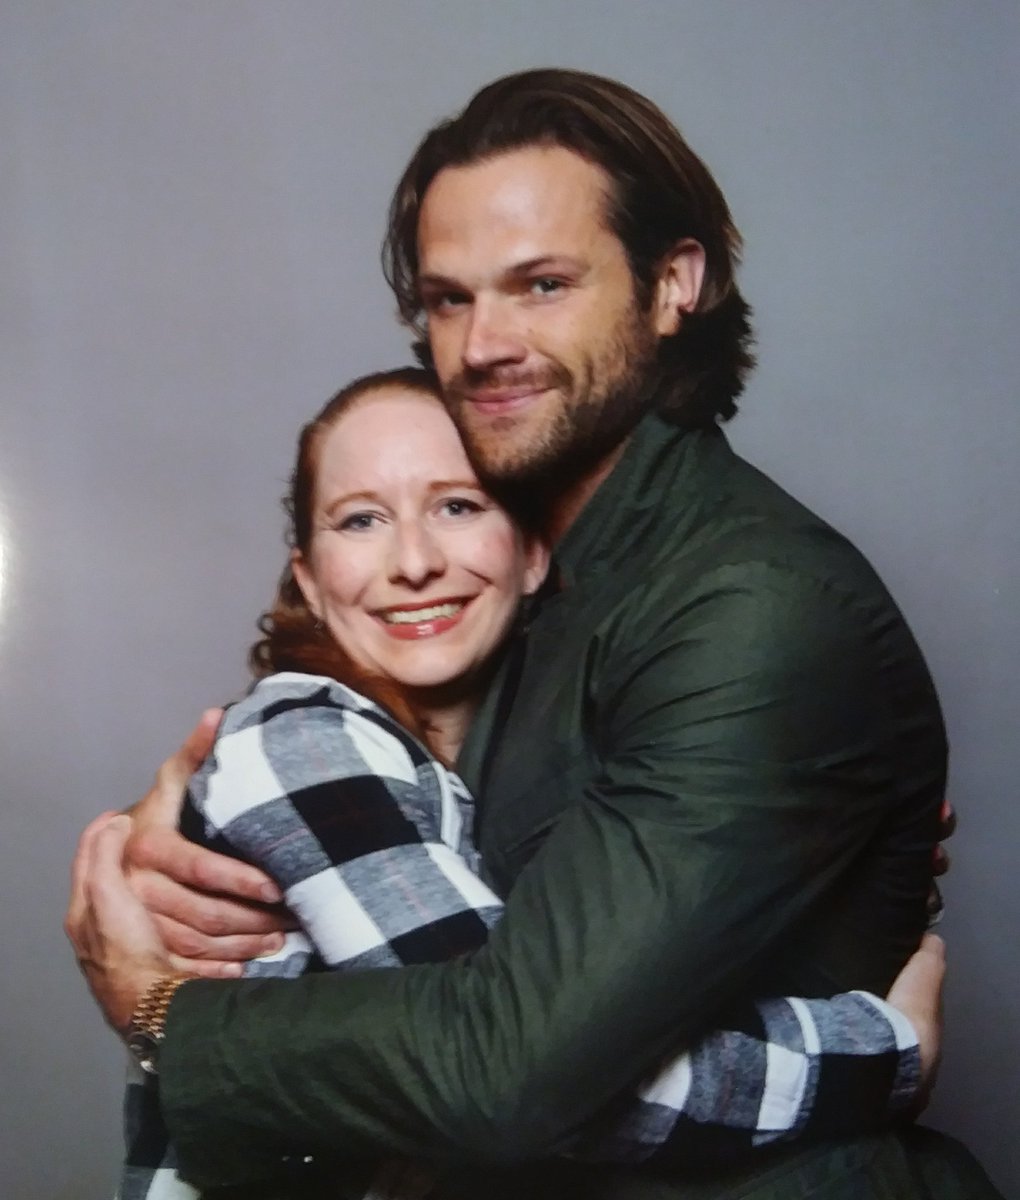 England was a stop on the way to Rome and my first JIBCon! There I met my sweet friend Sara from Germany, who helped me so much! Got my first solo Jared op and a toned-down version of my cosplay made the J2 panel amazing!  I claim that Jensen smile was because of me!